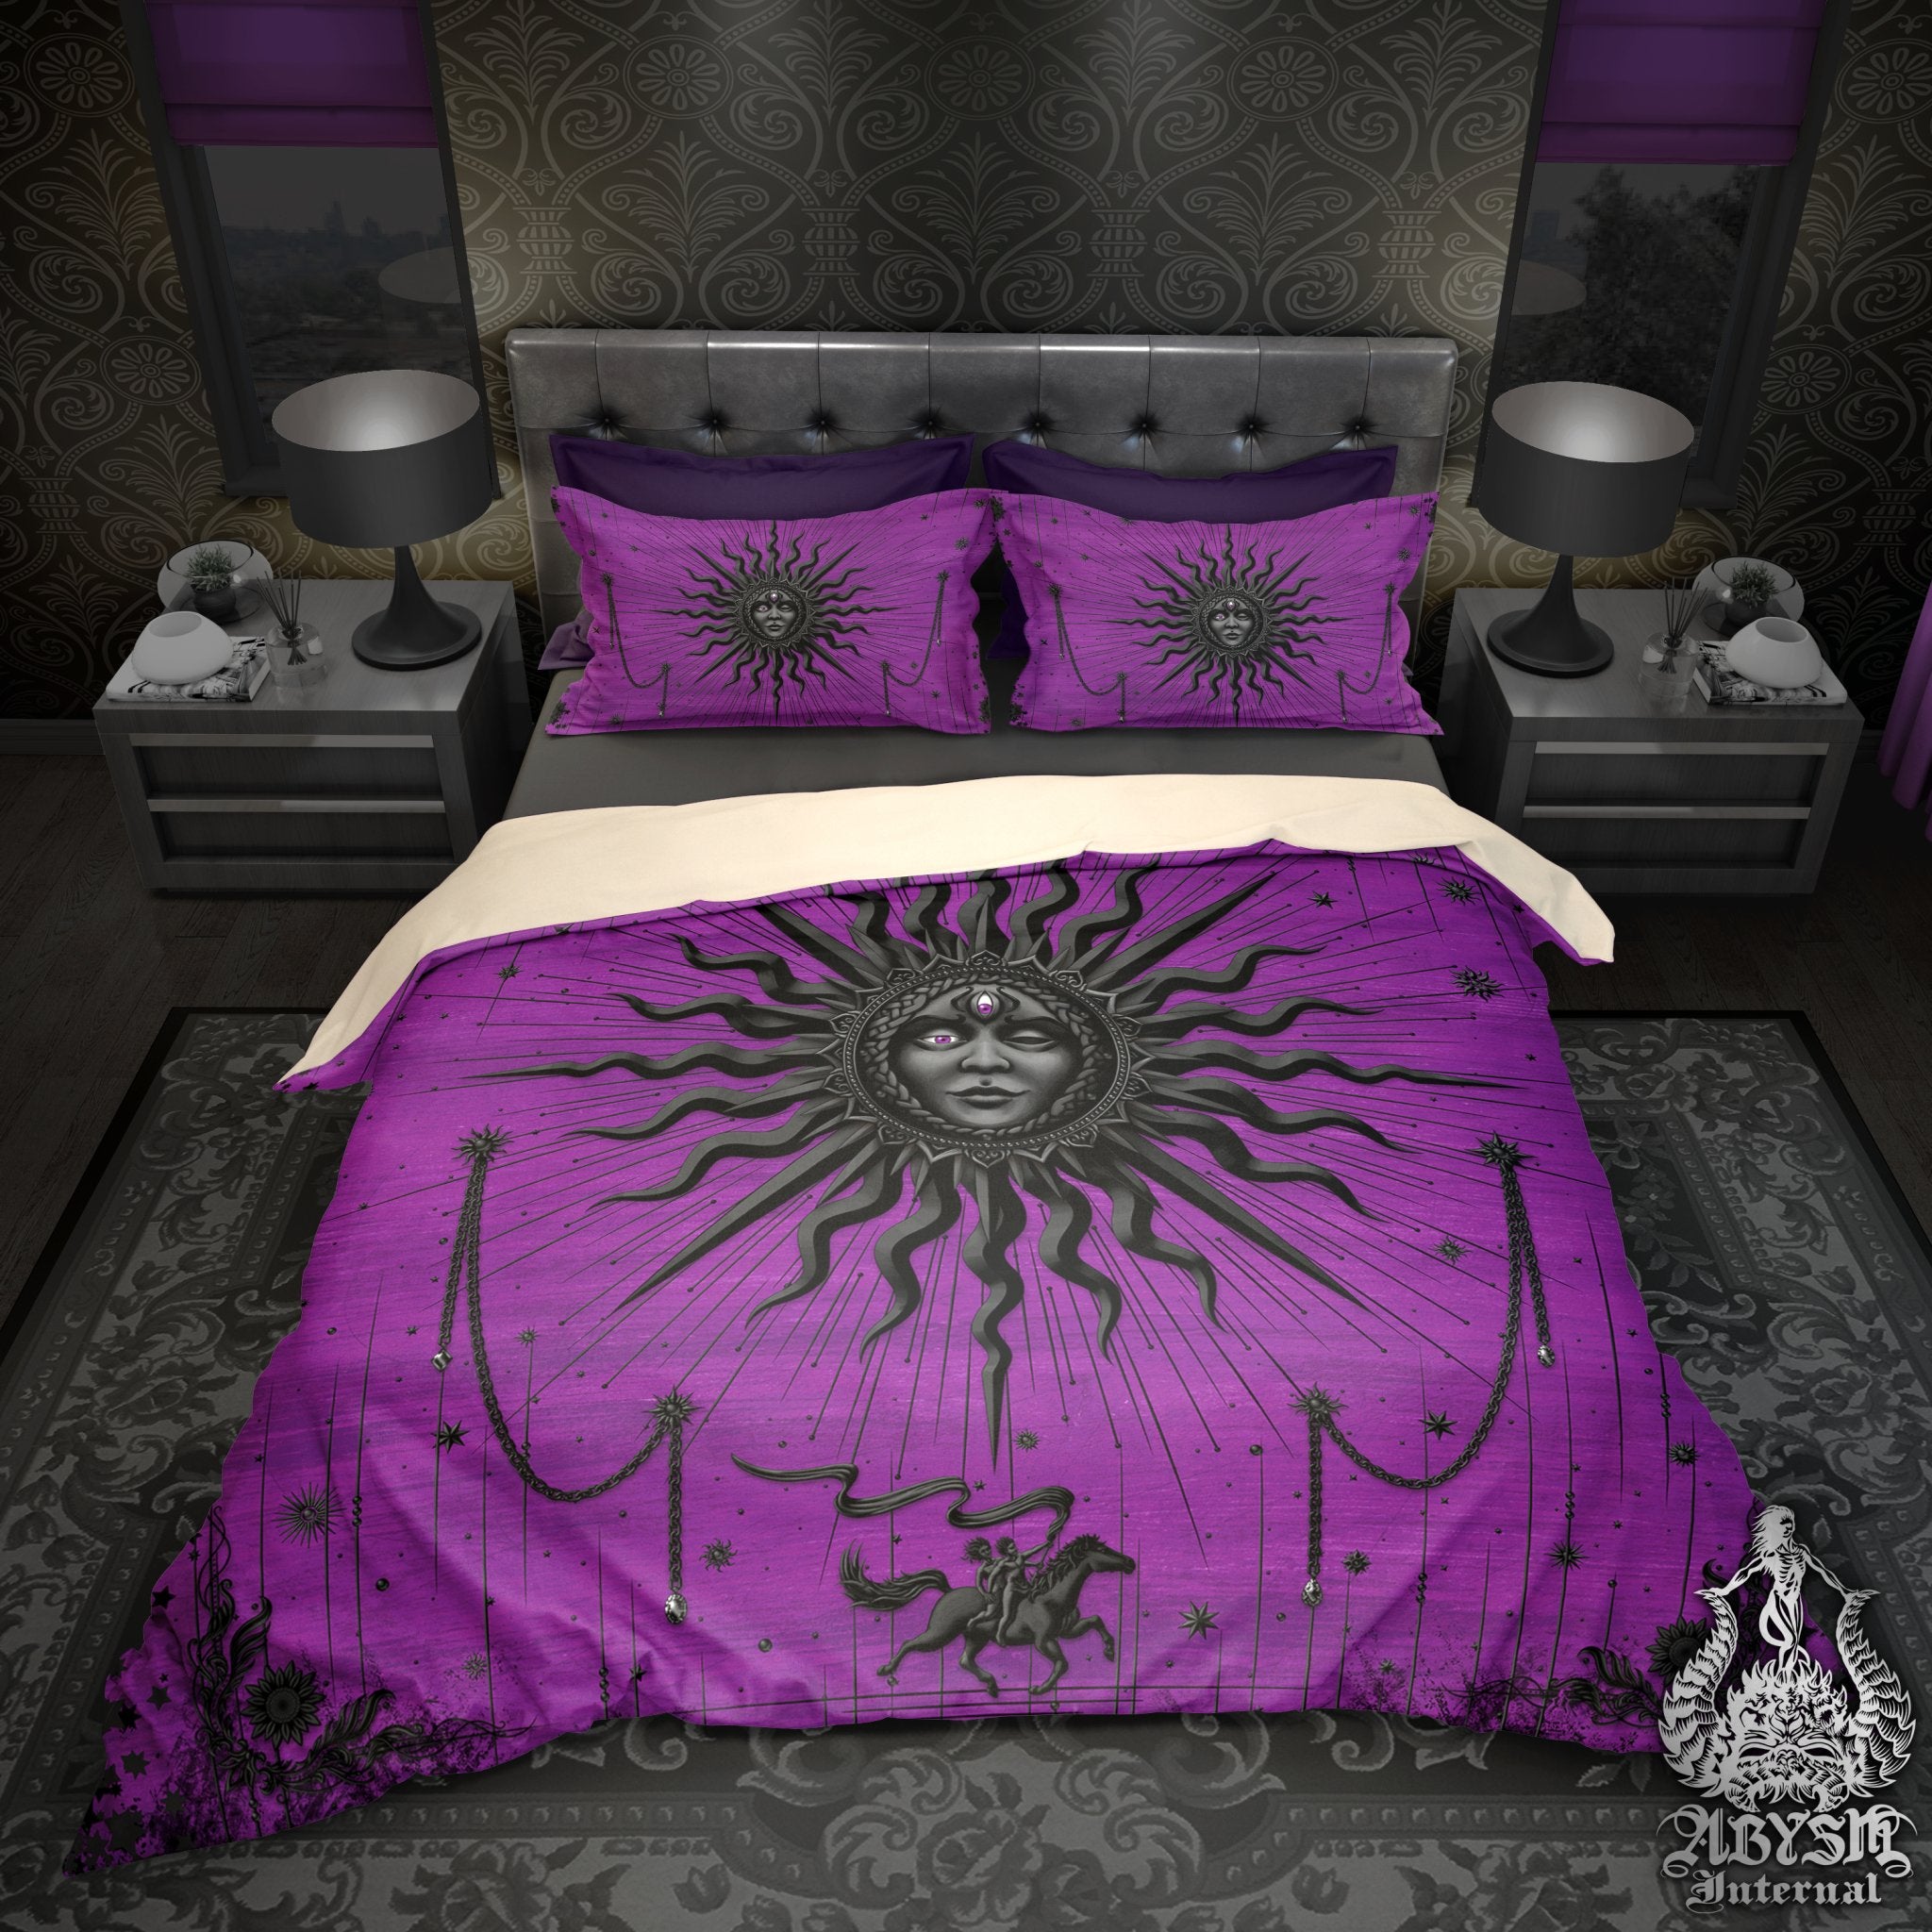 Whimsigoth Sun Duvet Cover, Bed Covering, Pastel Goth Comforter, Purple and Black Bedroom Decor King, Queen & Twin Bedding Set - Tarot Arcana Art - Abysm Internal